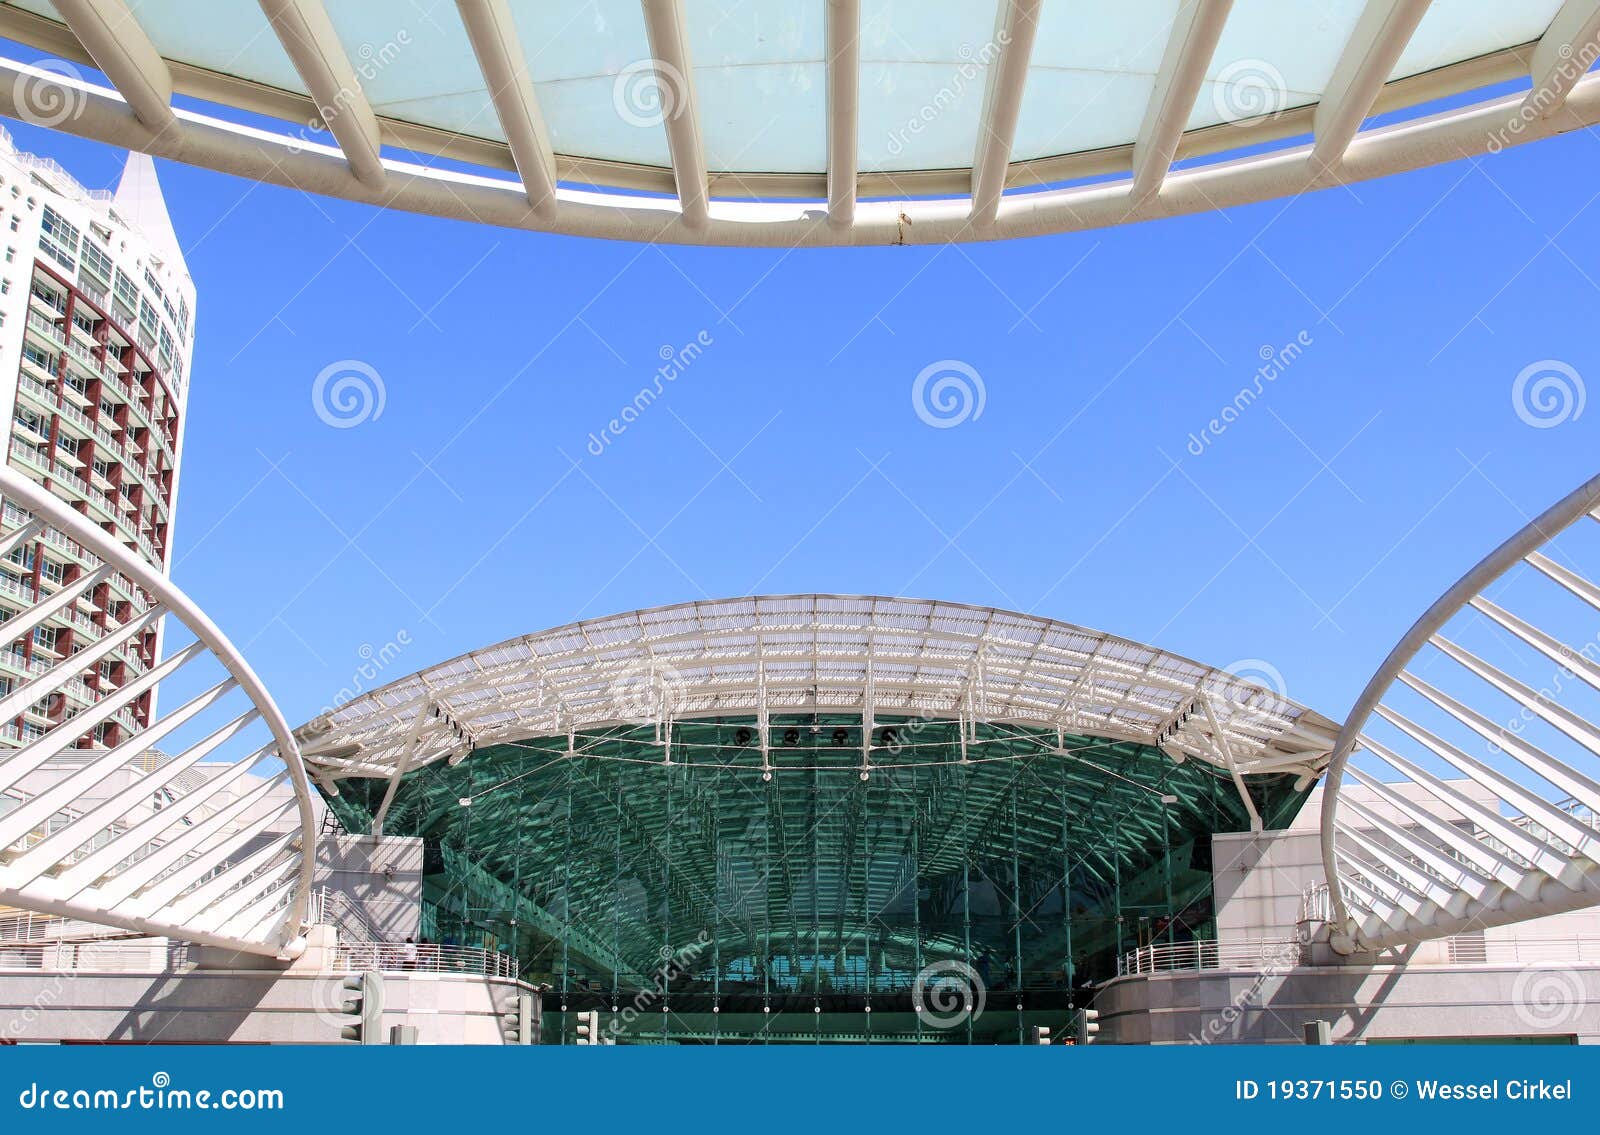 Centro Vasco da Gama in Lisboa, Portugal. Centro Vasco da Gama is one of the last shopping centers built in Lisbon, located right next to the area used for Expo 98. This glass-roofed complex houses designer fashion, cinemas and food court.